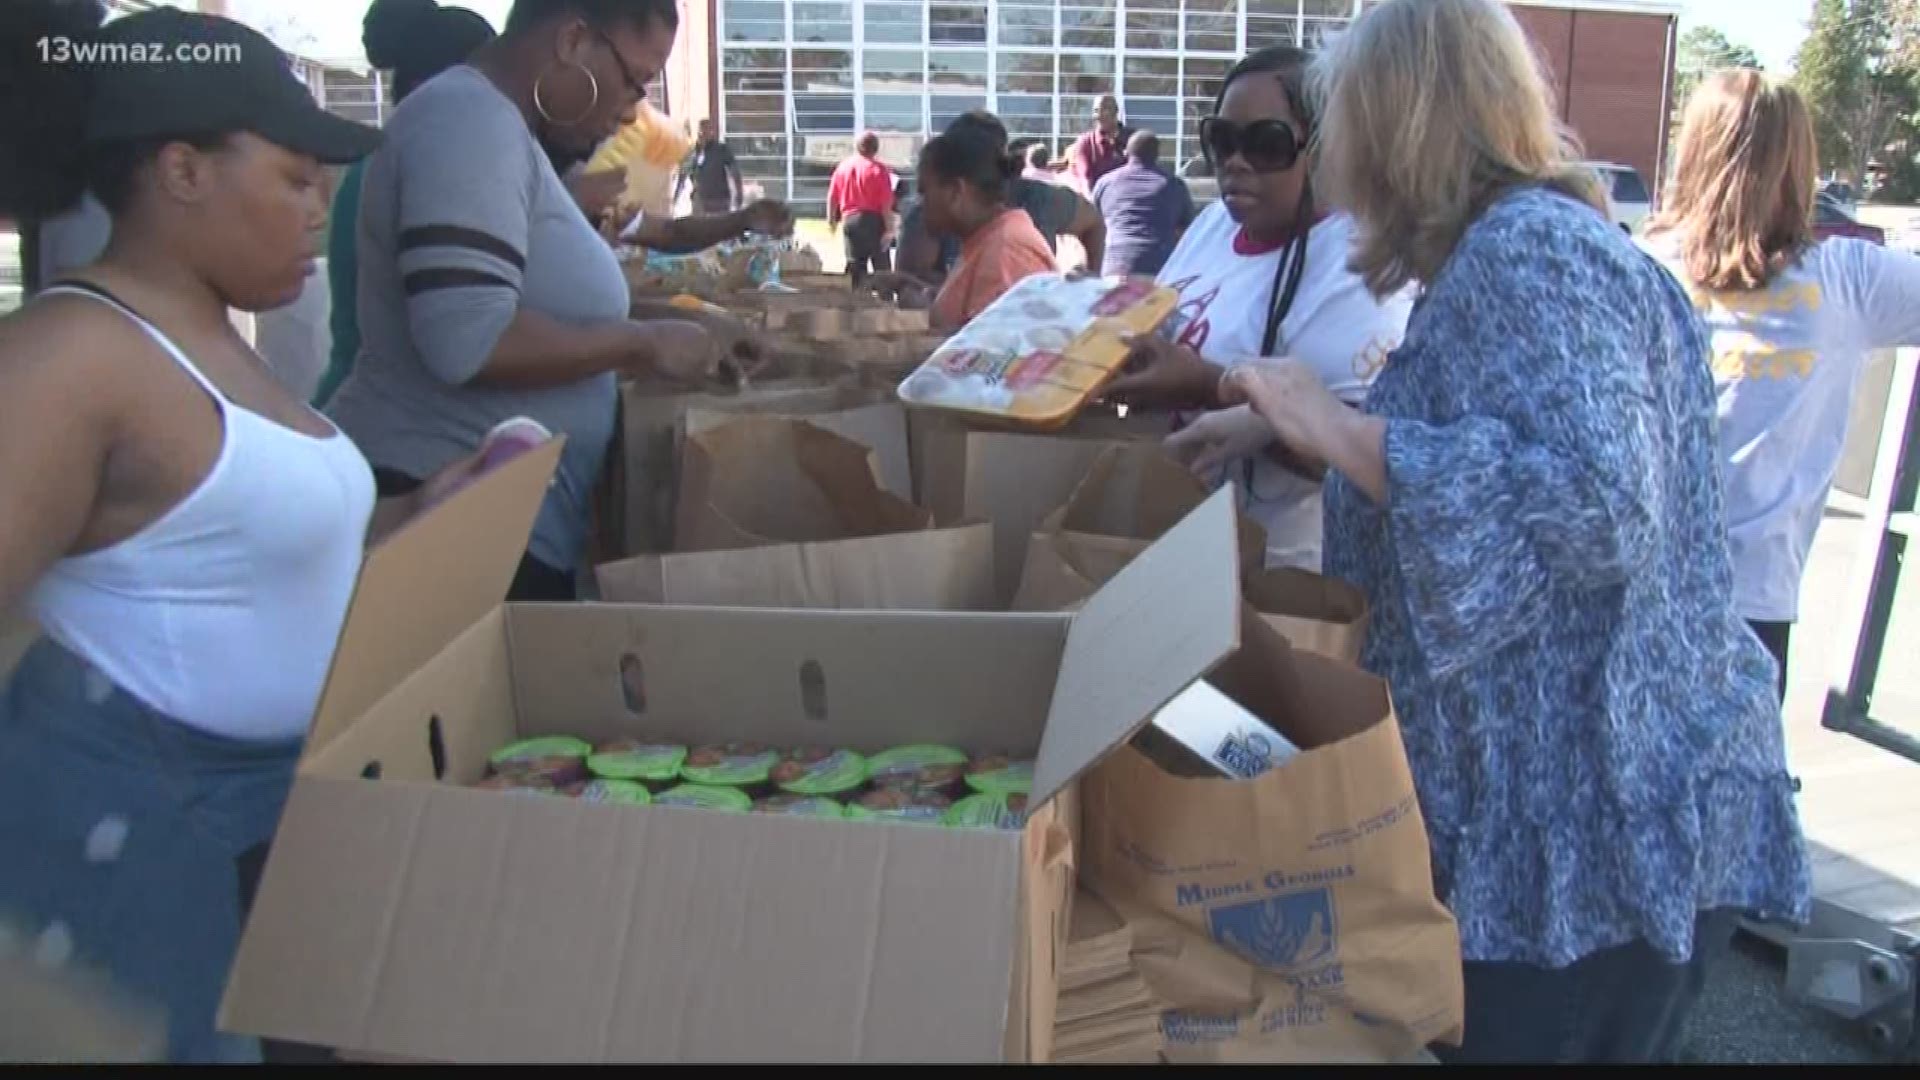 Mobile food pantry helps Michael victims